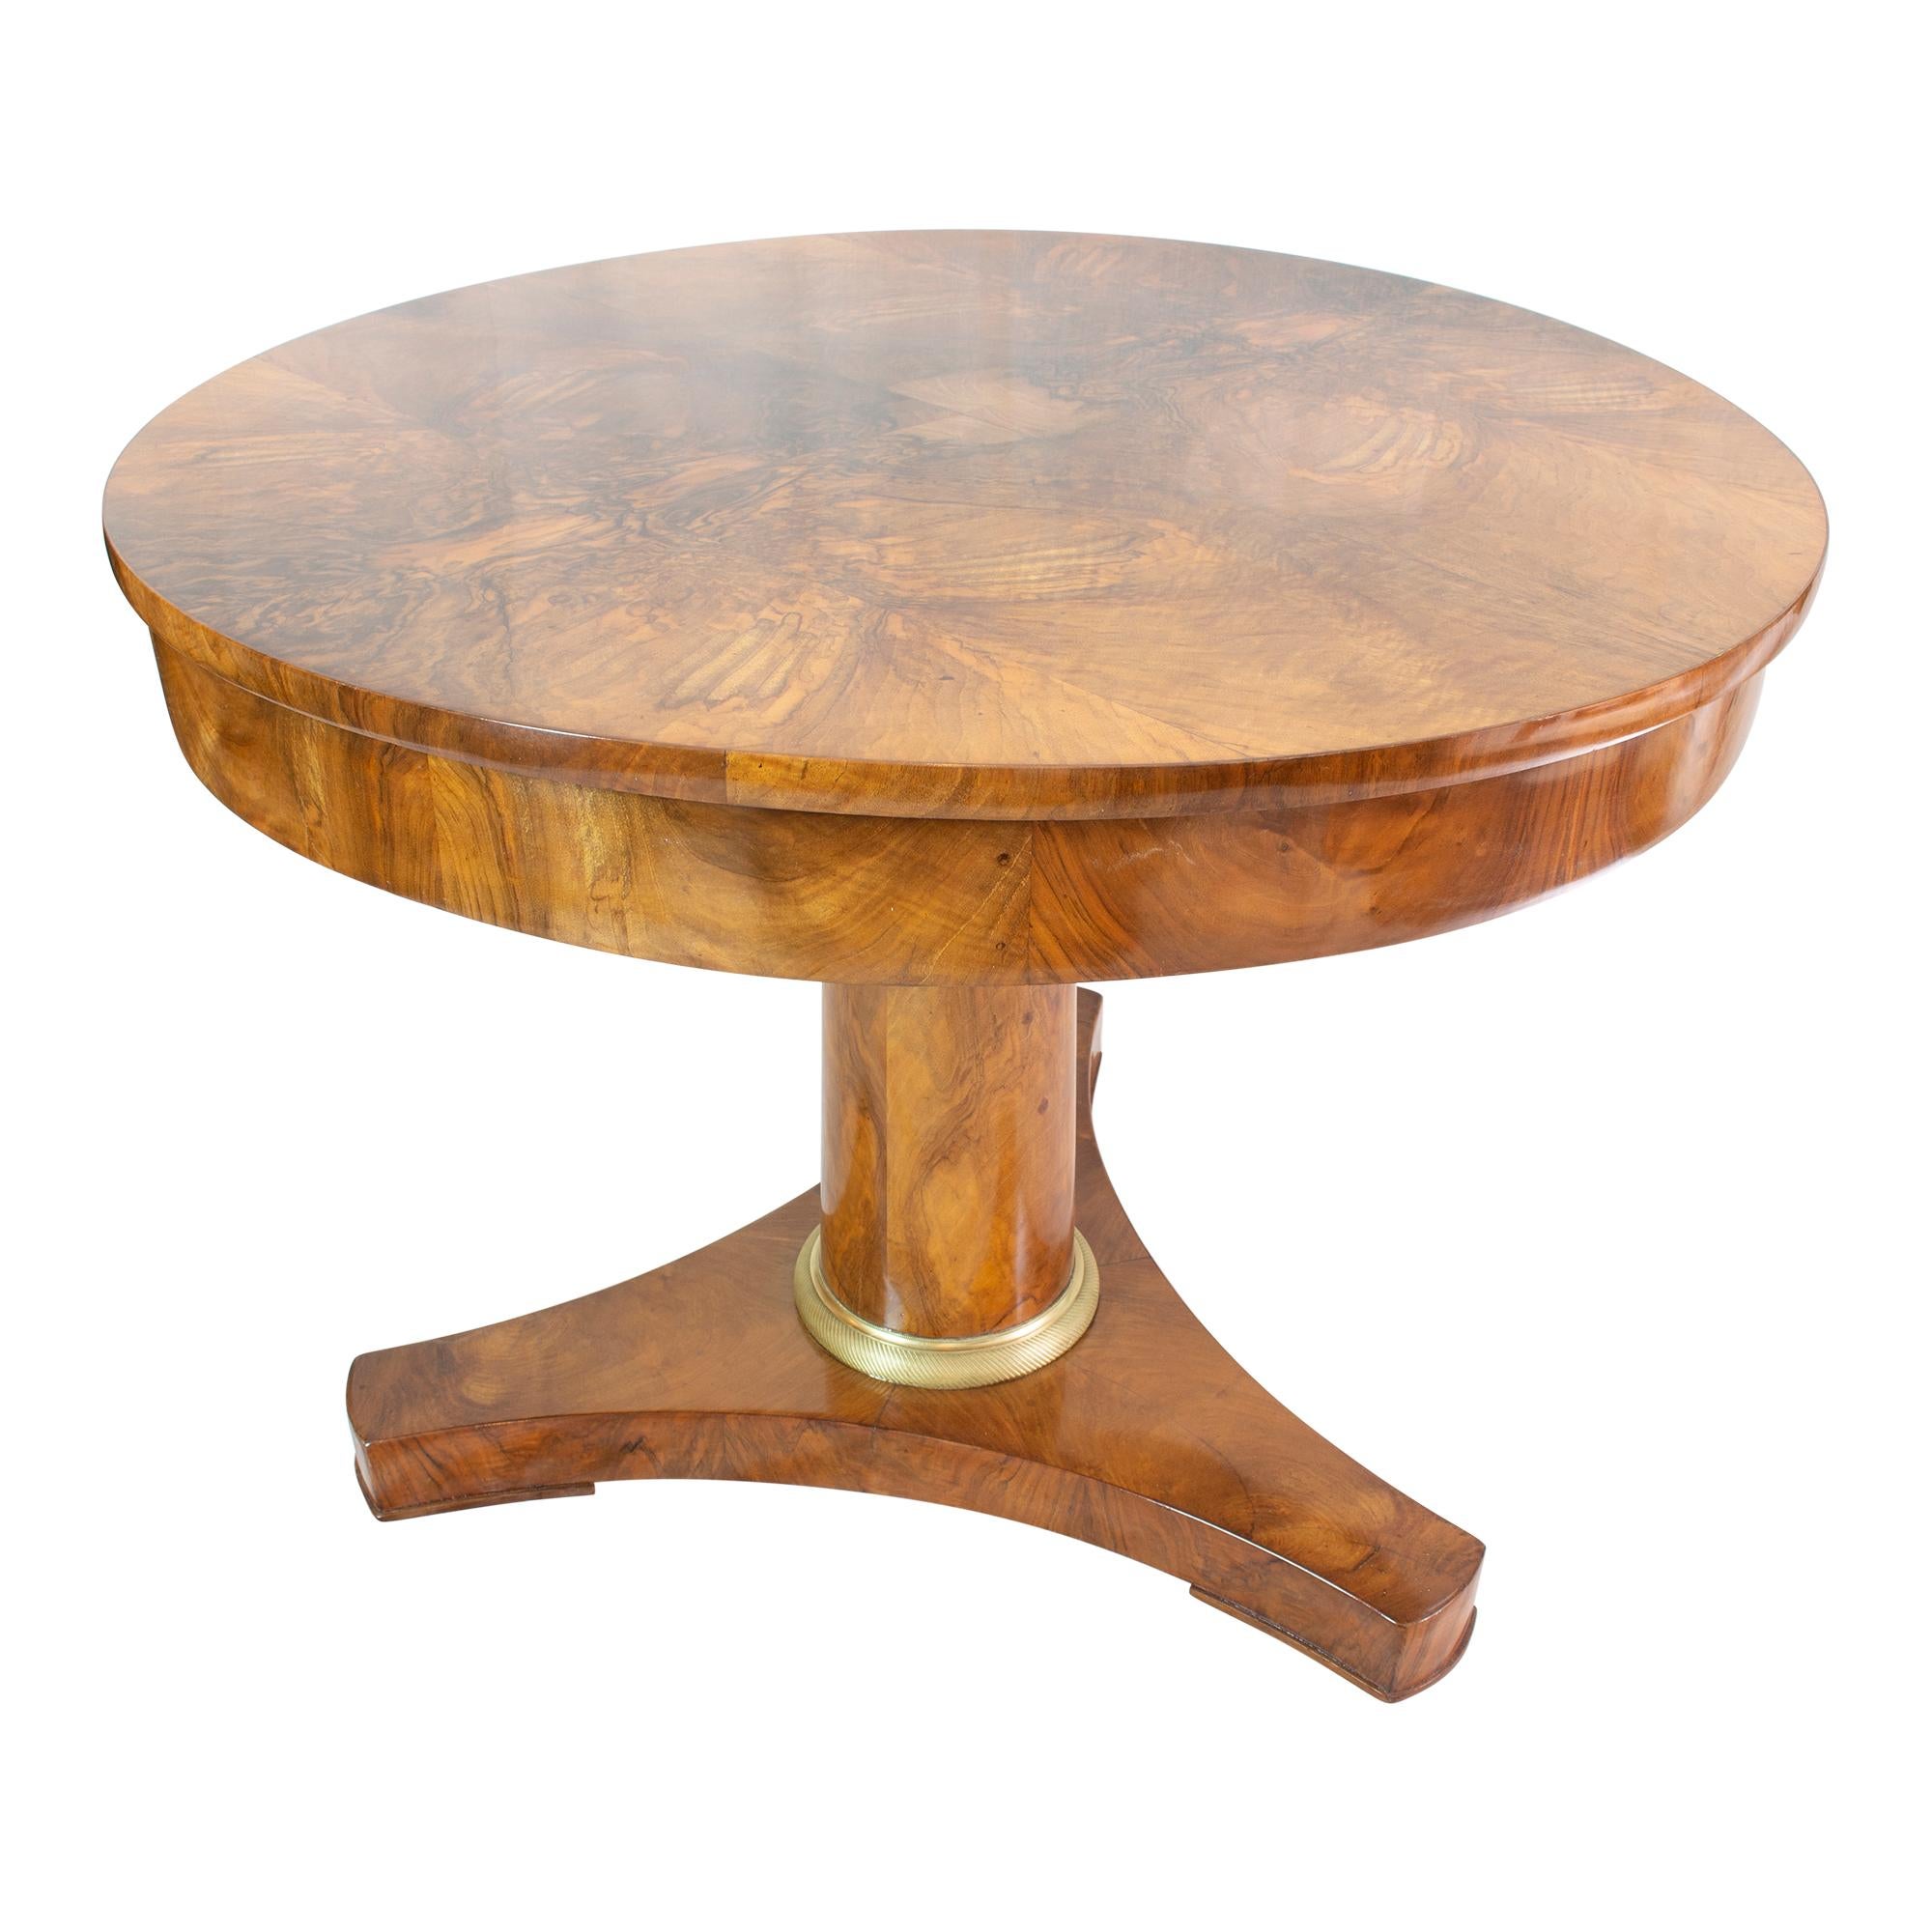 Beautiful round salon table from the Biedermeier / Empire period around 1815. The table is covered with thick walnut saw veneer. The veneer is mirrored several times and thus creates a beautiful veneer pattern. The table has a unique construction